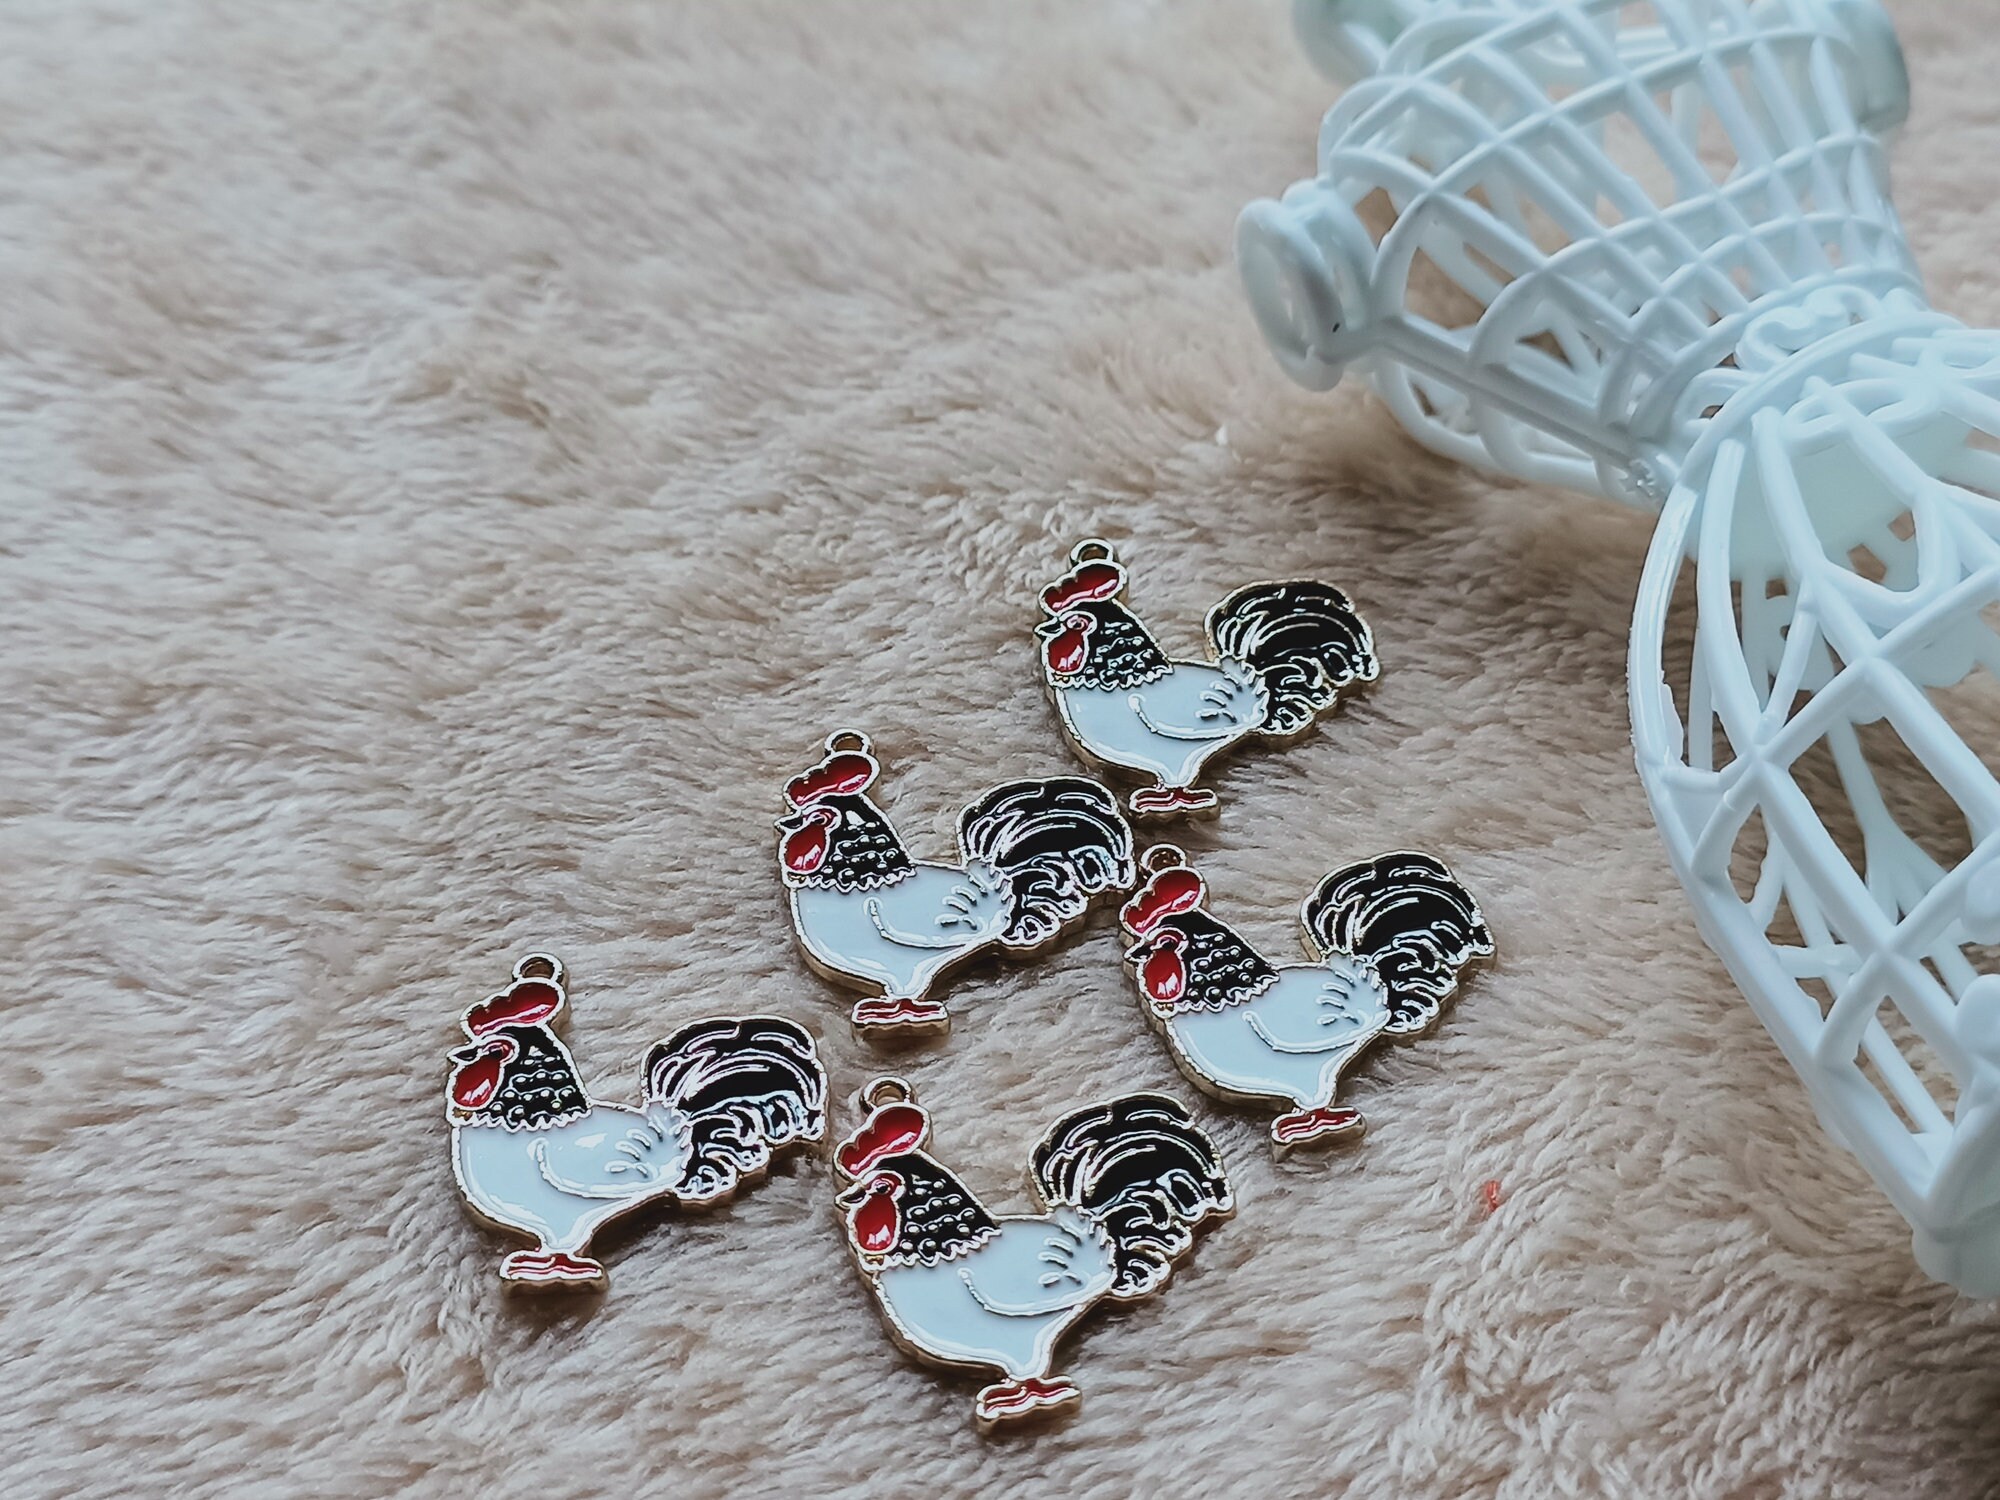  Honbay 40PCS Alloy Chicken Charms Pendant Rooster And Hen  Dangle Pendants Farm Animal Charms For Earrings Bracelet Necklace Jewelry  Making